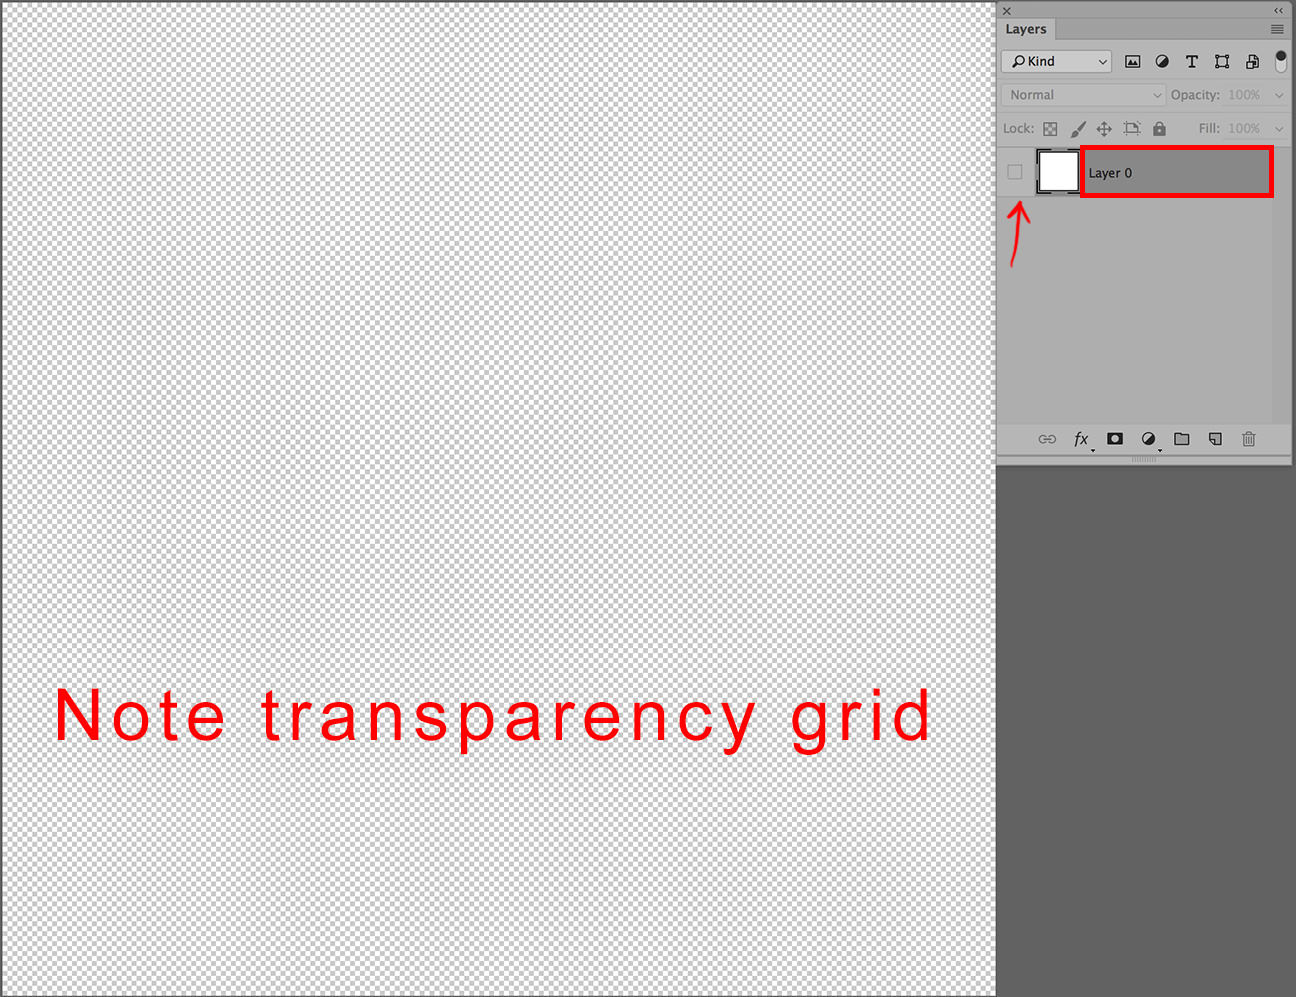 layers in photoshop transparency grid